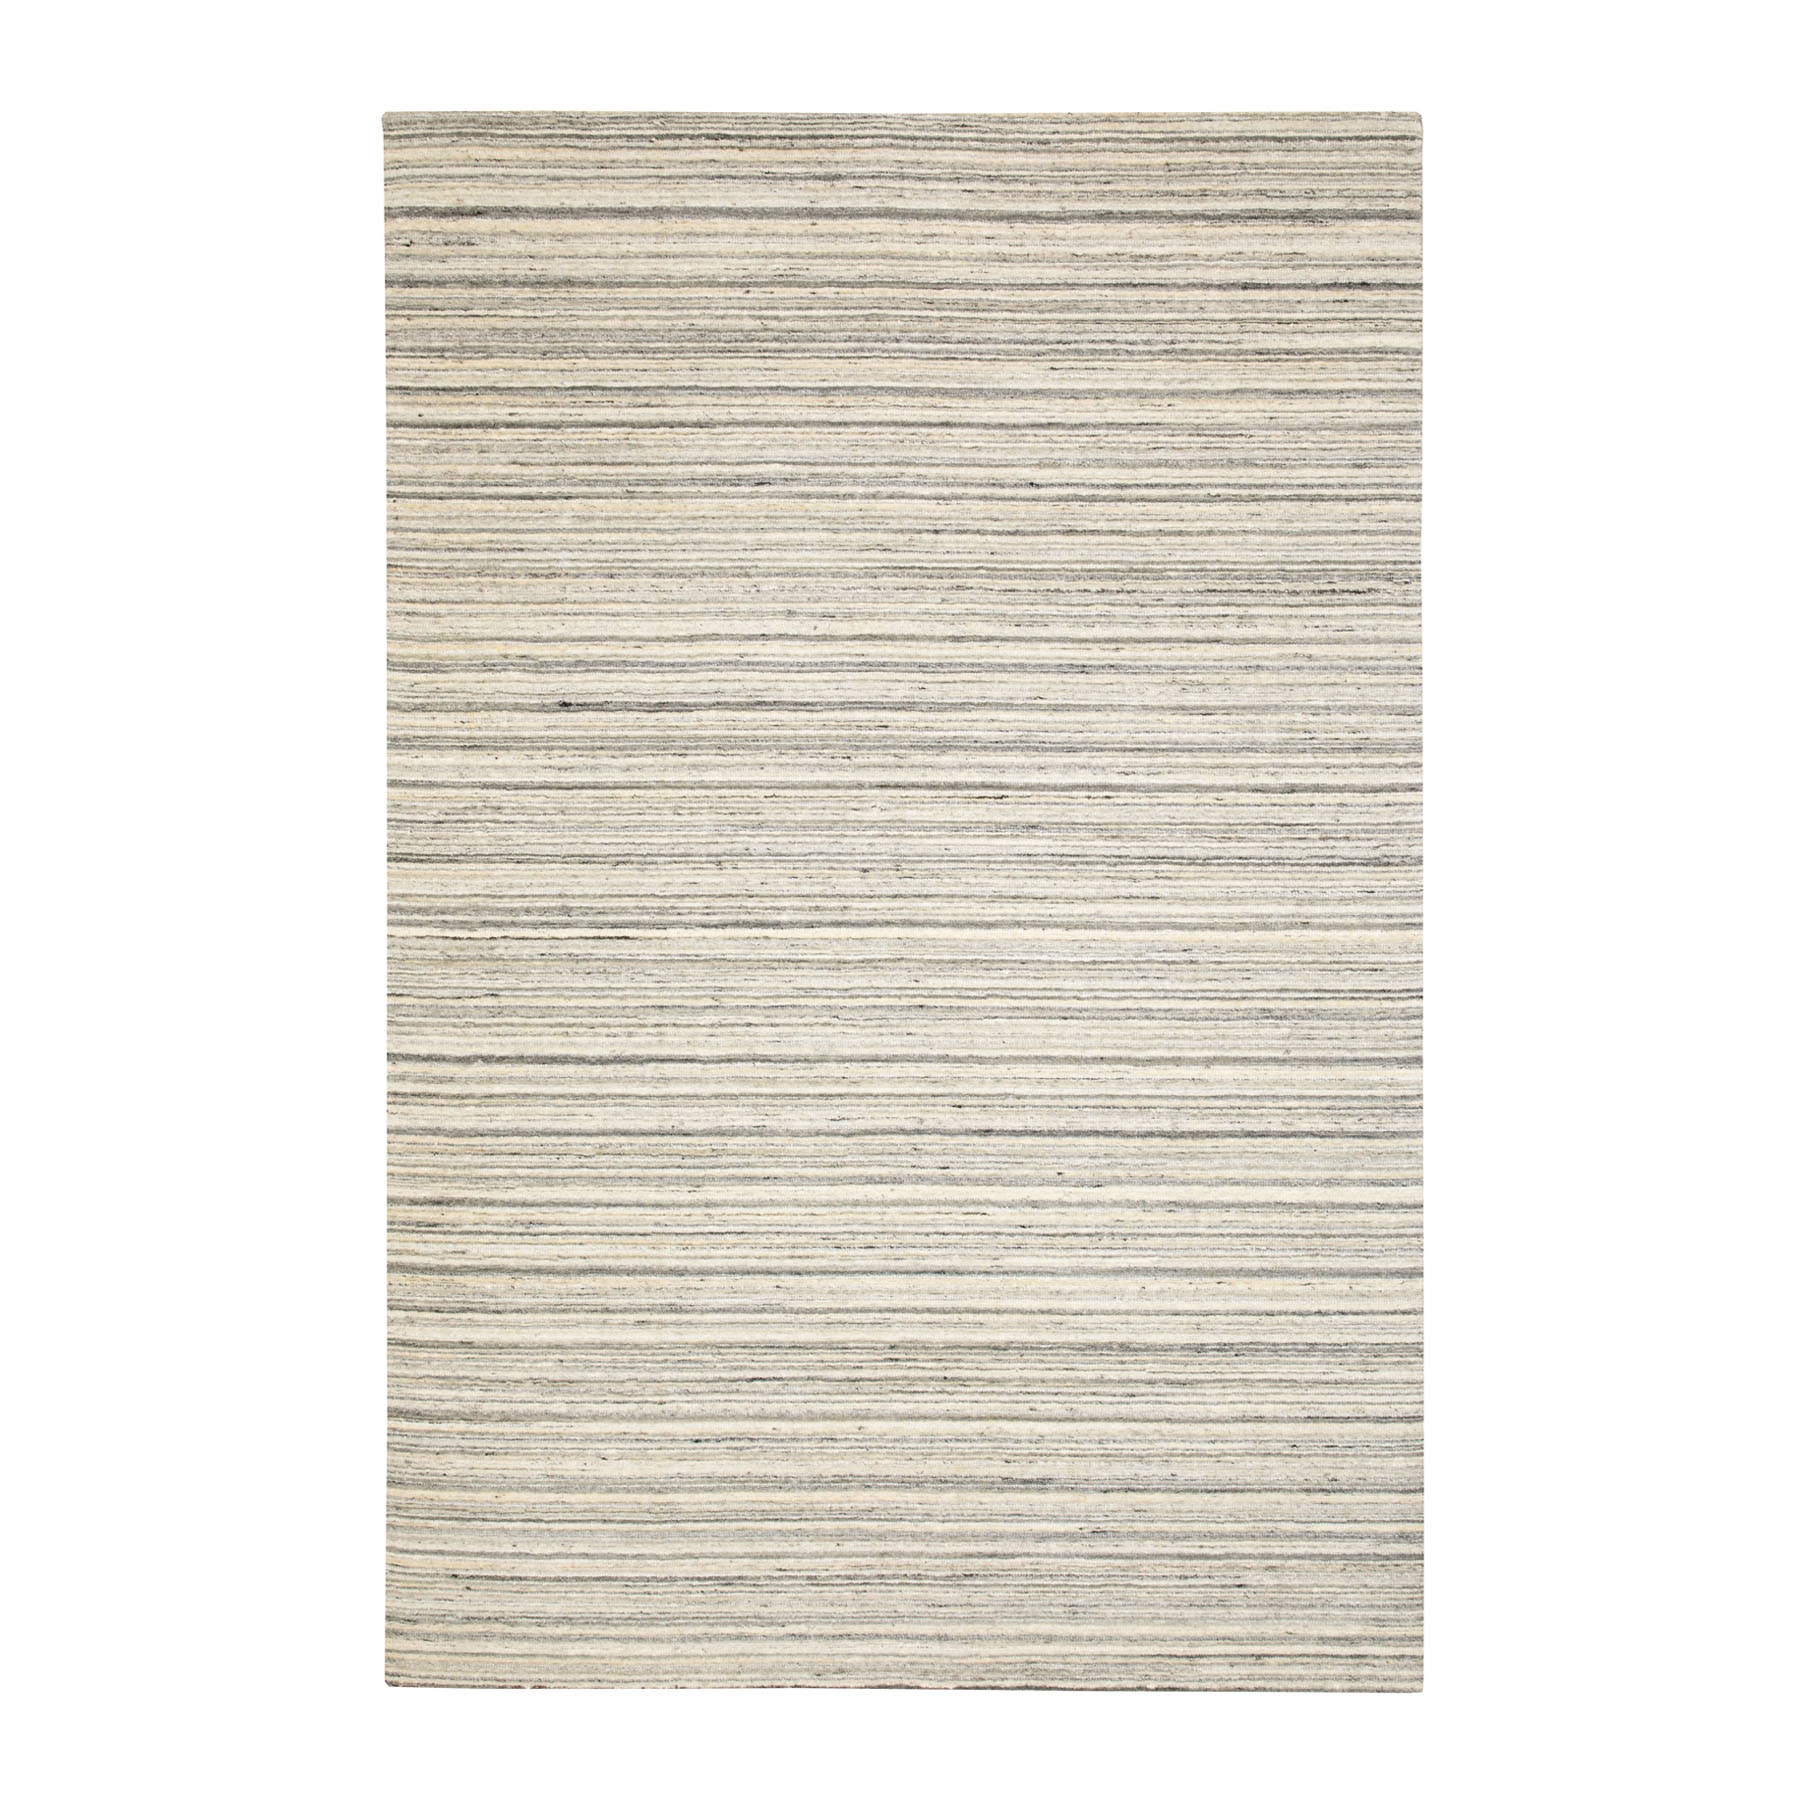 Modern & Contemporary Wool Hand-Woven Area Rug 6'0